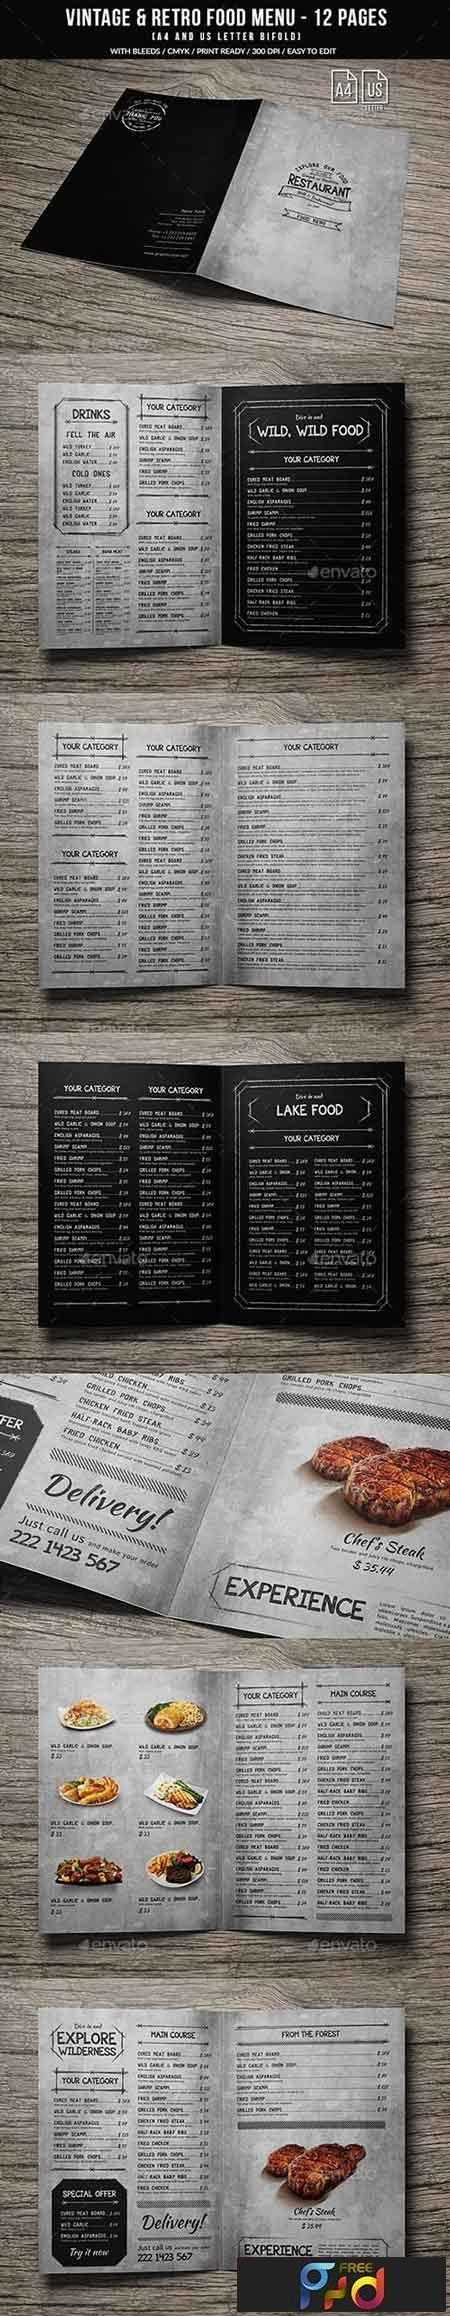 Vintage And Retro Bifold Menu A4 & US Letter   12 pgs